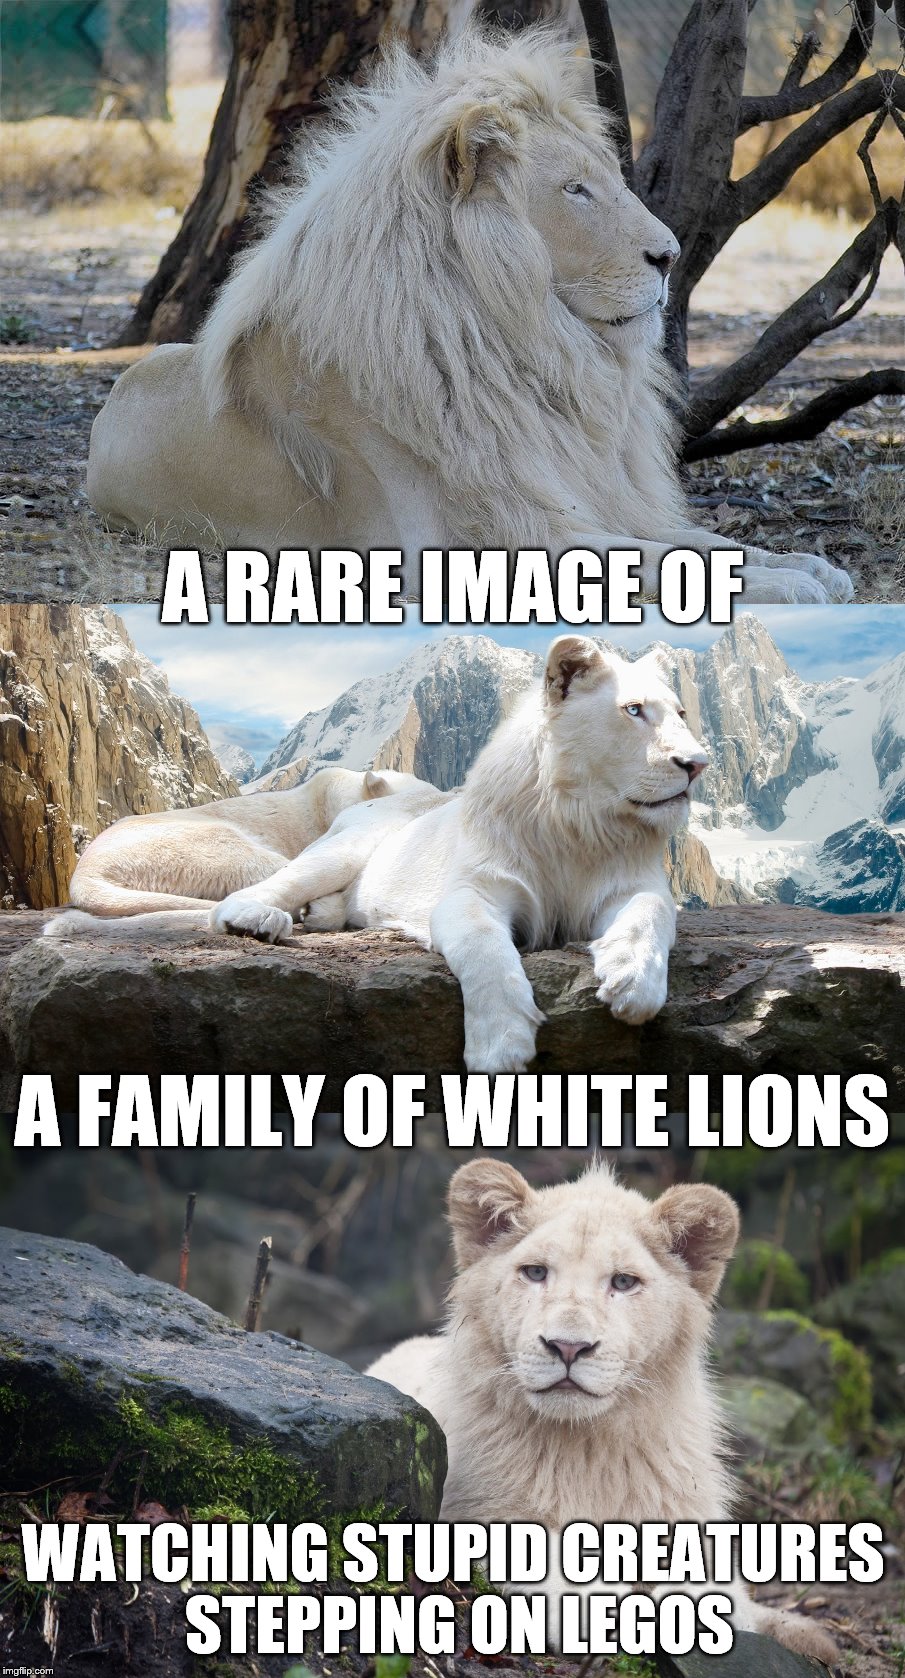 This Just Keeps Getting Better! | A RARE IMAGE OF; A FAMILY OF WHITE LIONS; WATCHING STUPID CREATURES STEPPING ON LEGOS | image tagged in a rare image of,a family of white lions,watching stupid creatures stepping on legos,this just keeps getting better | made w/ Imgflip meme maker